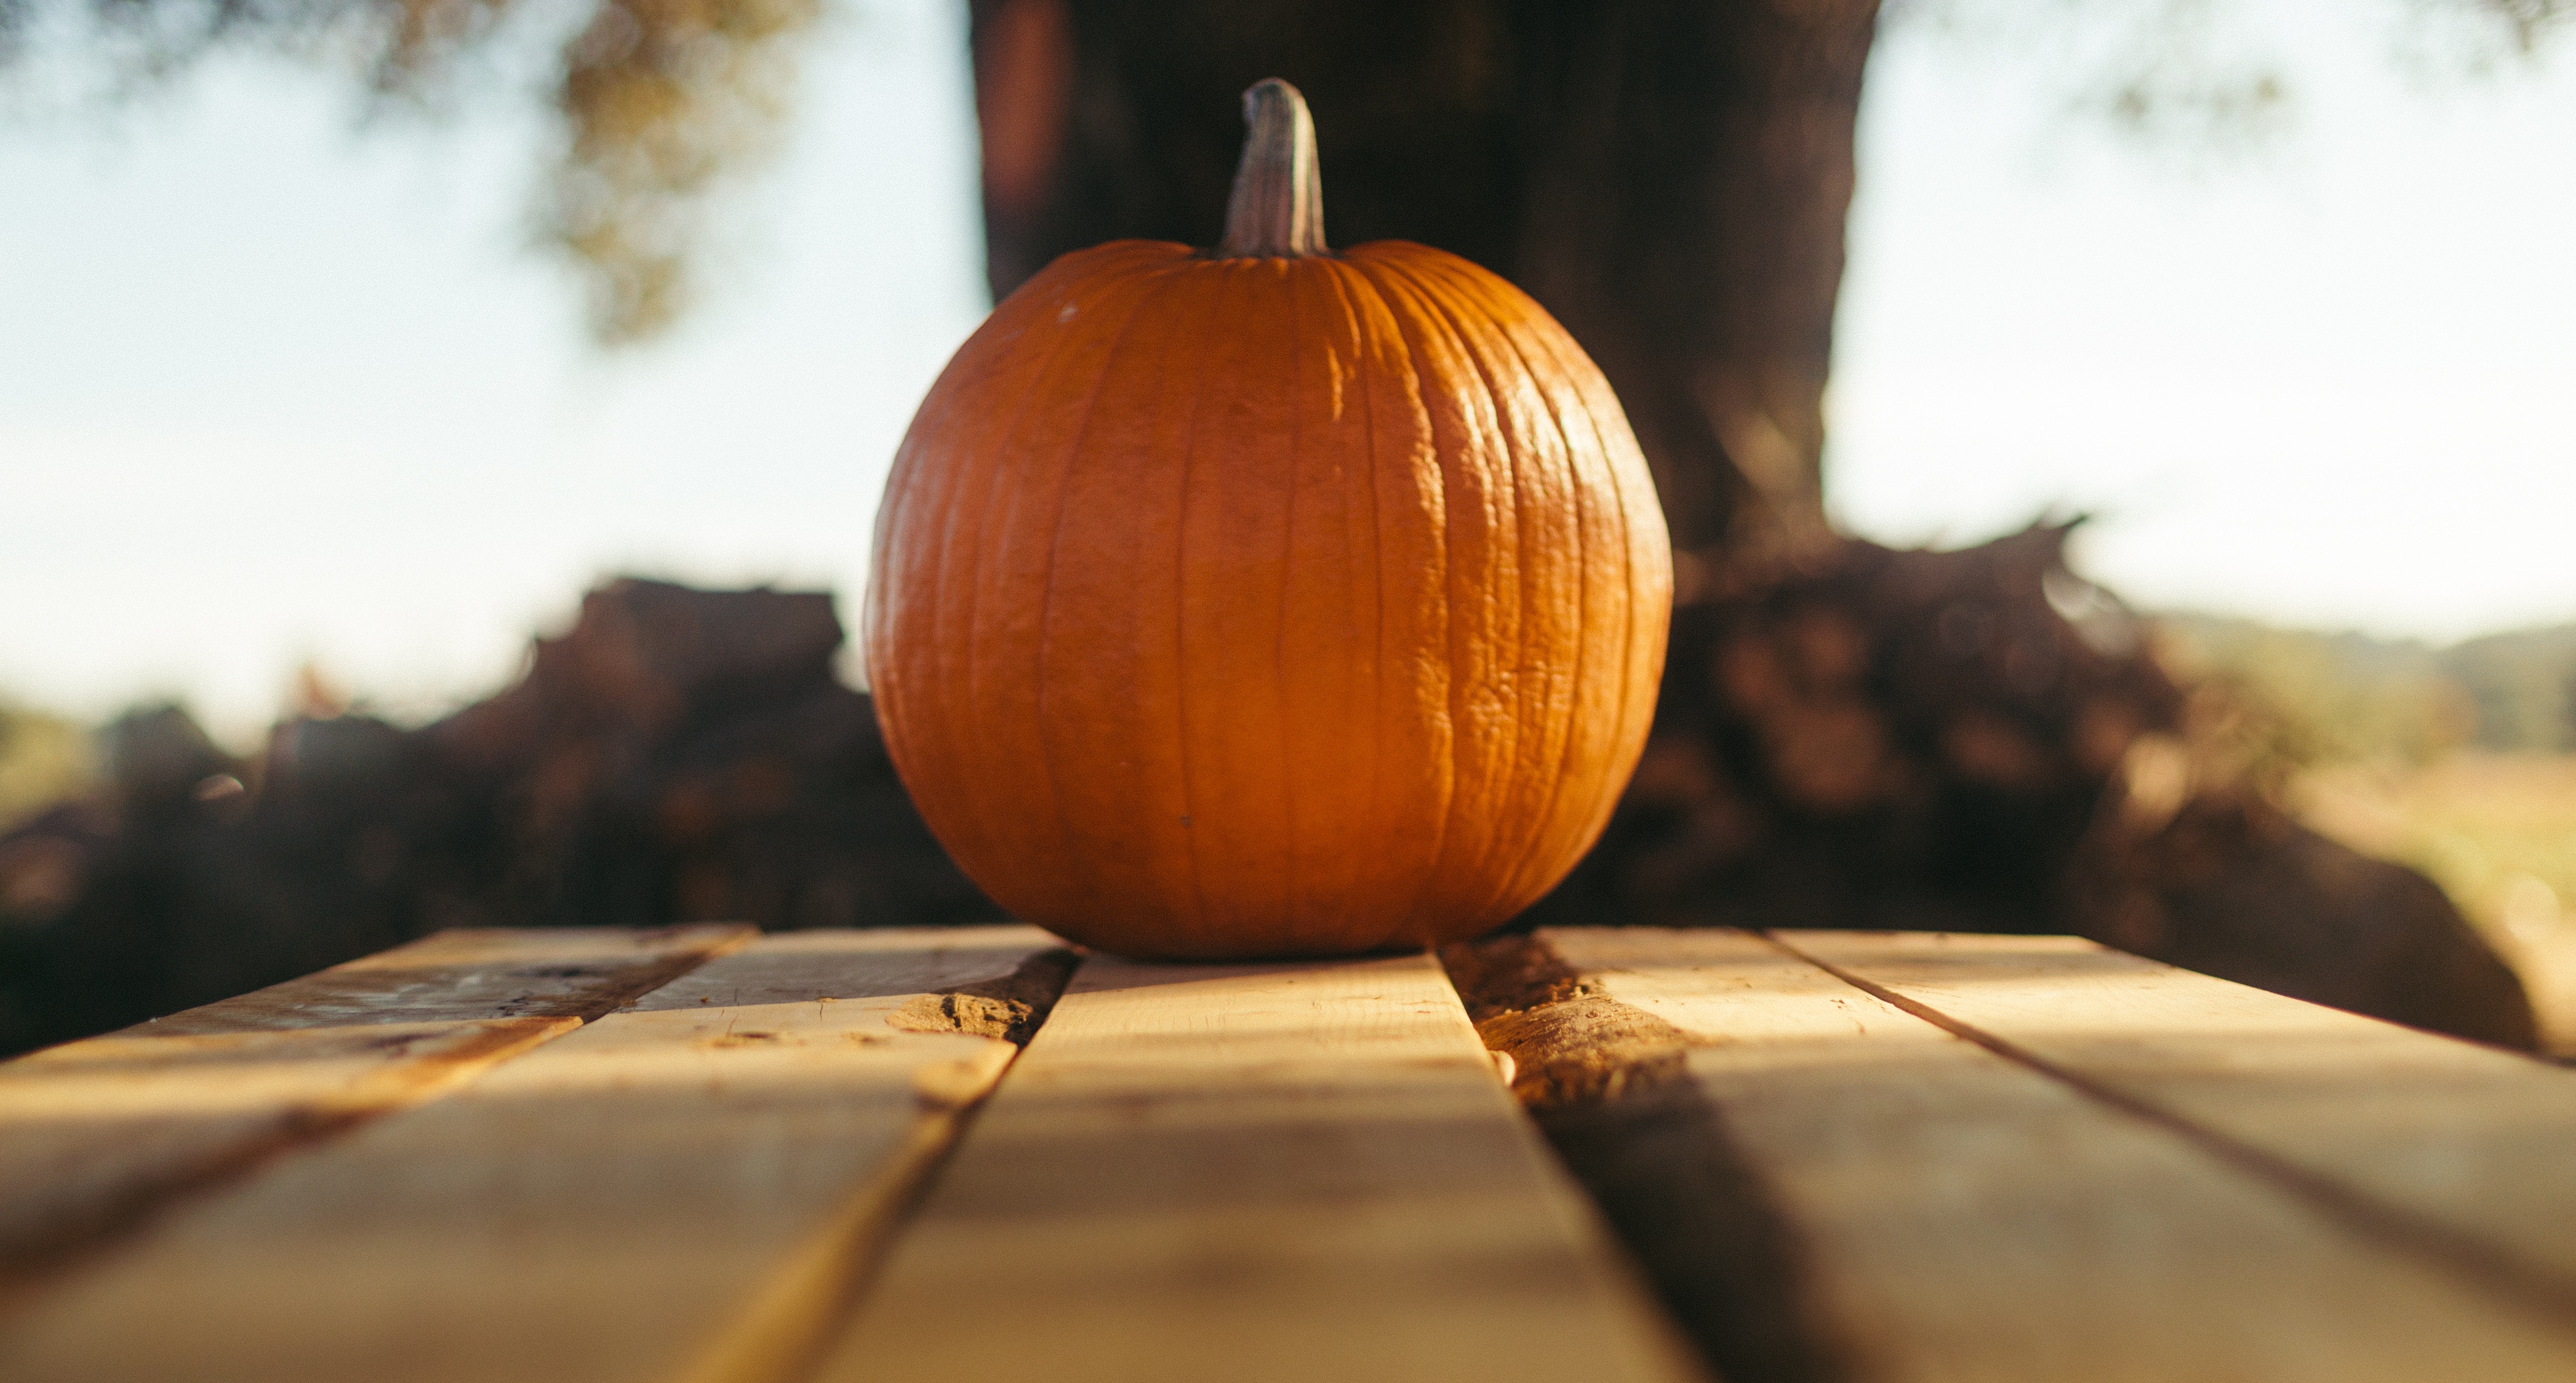 Skin to Seed: How to Eat an Entire Pumpkin